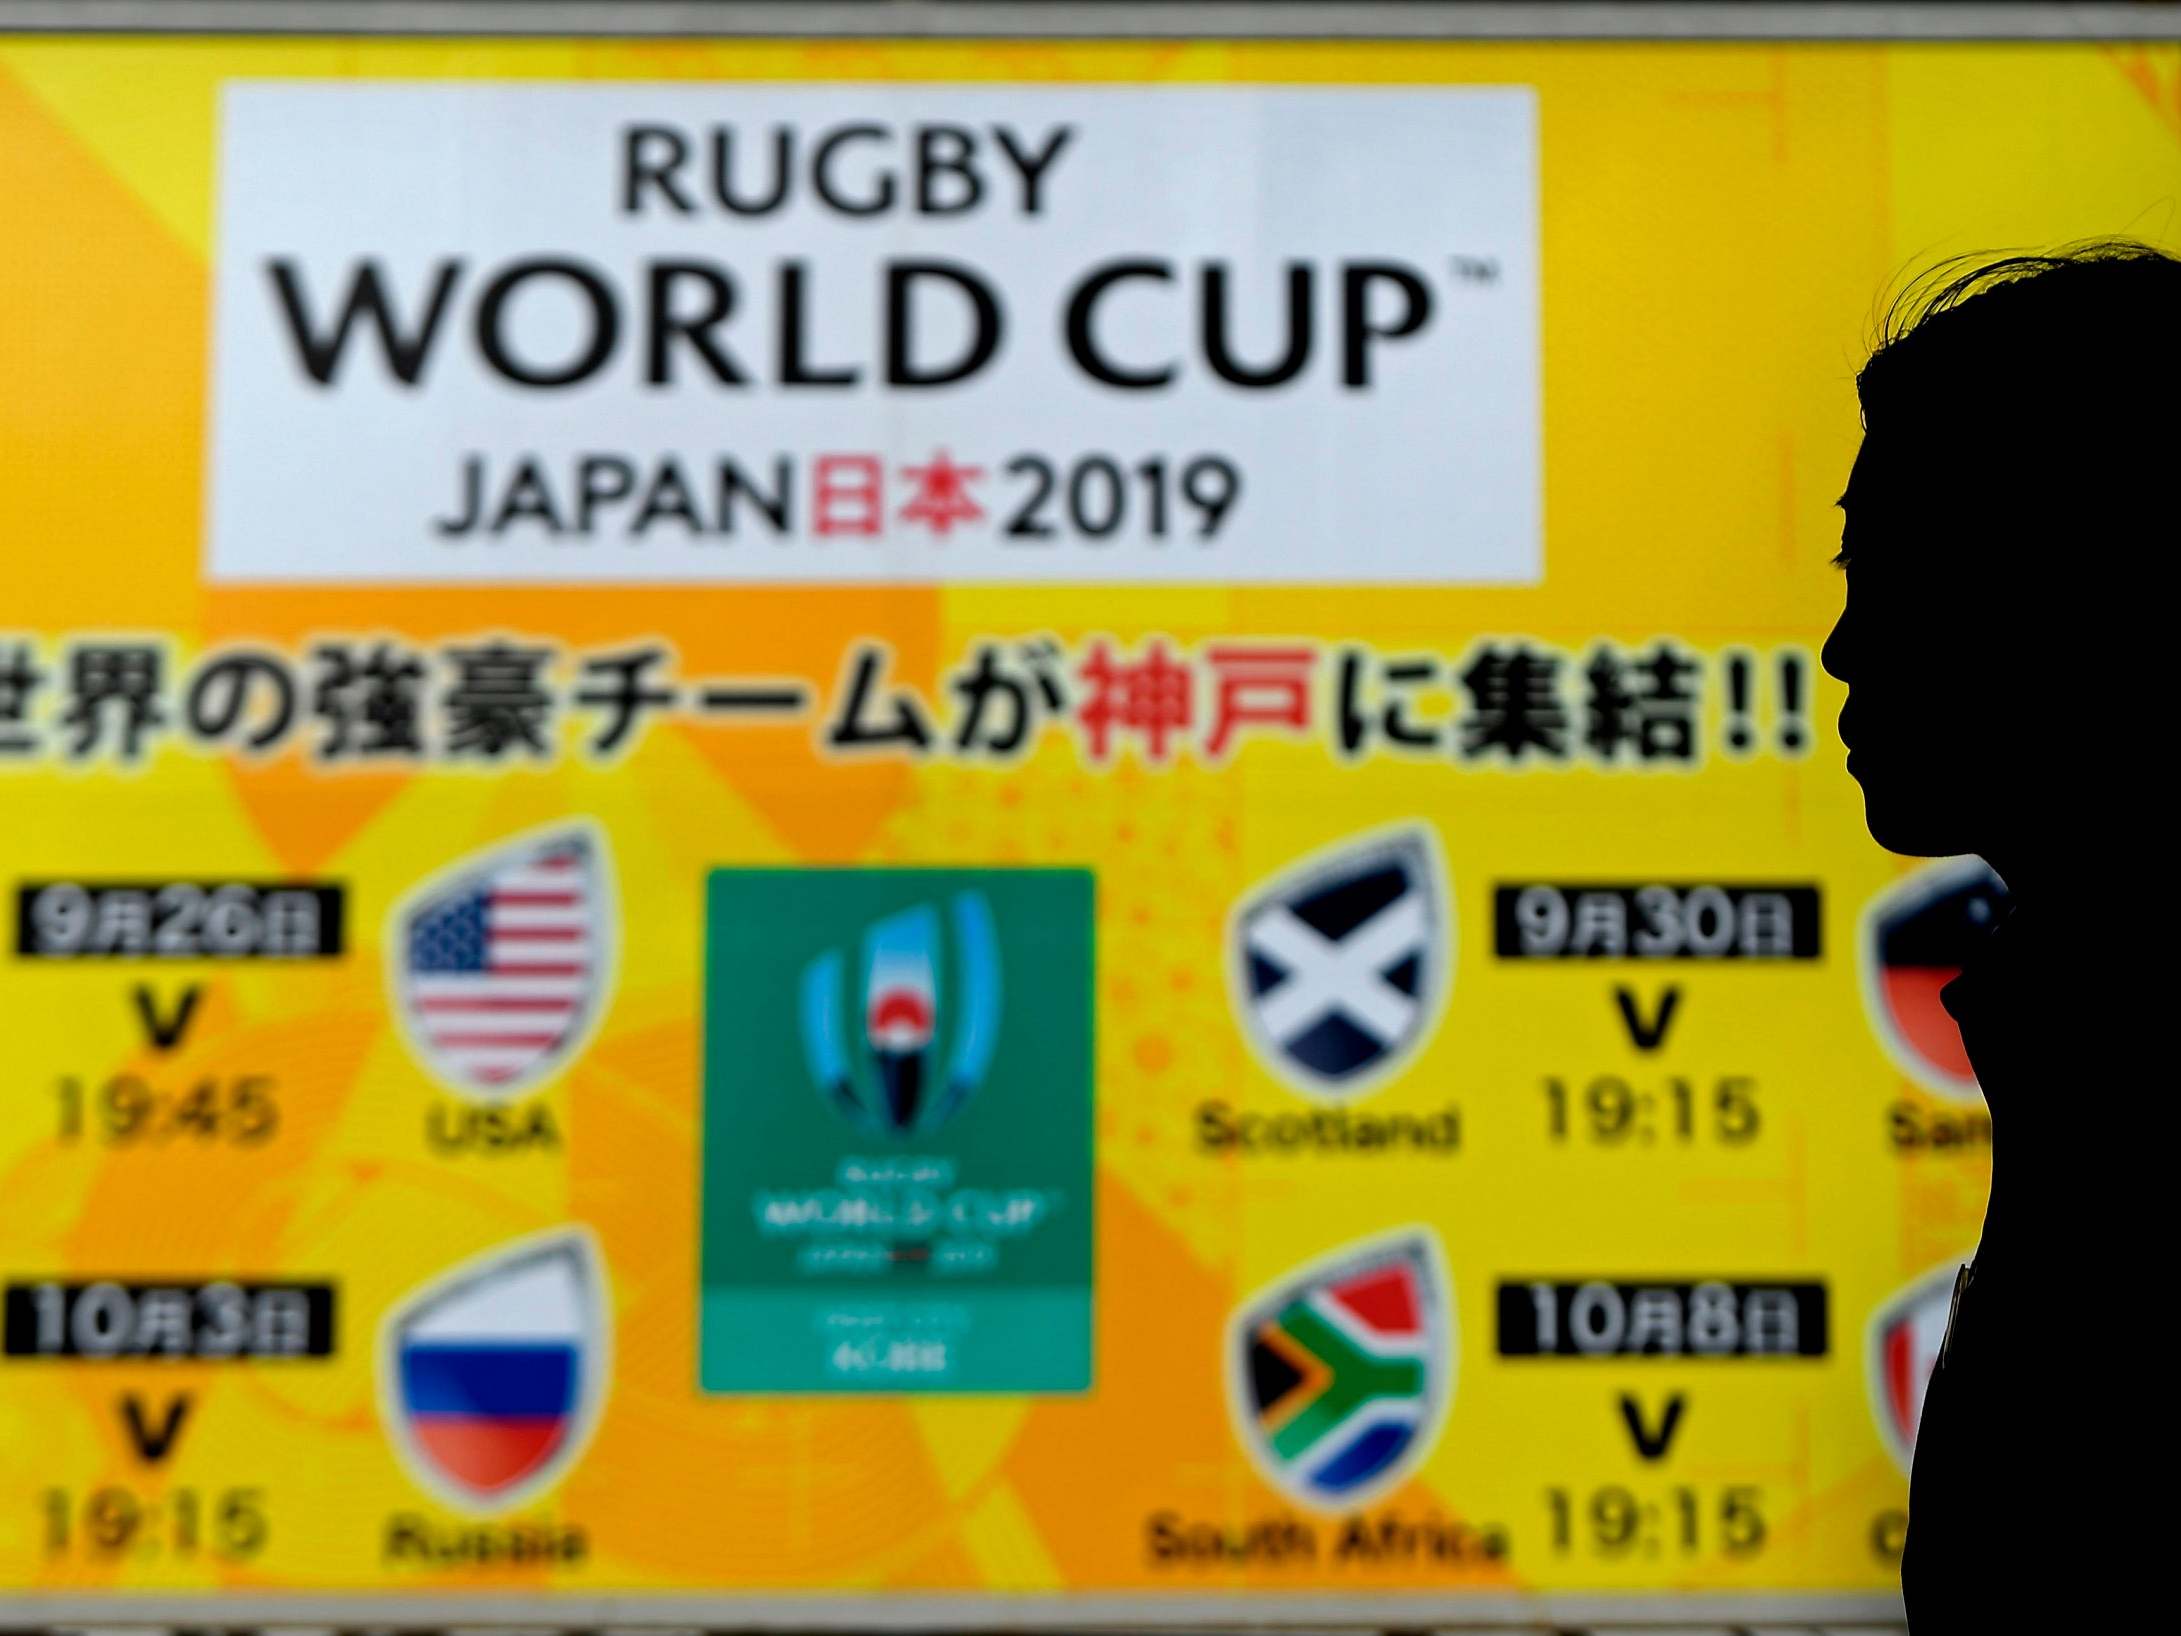 The Rugby World Cup is in Japan for the first time ever